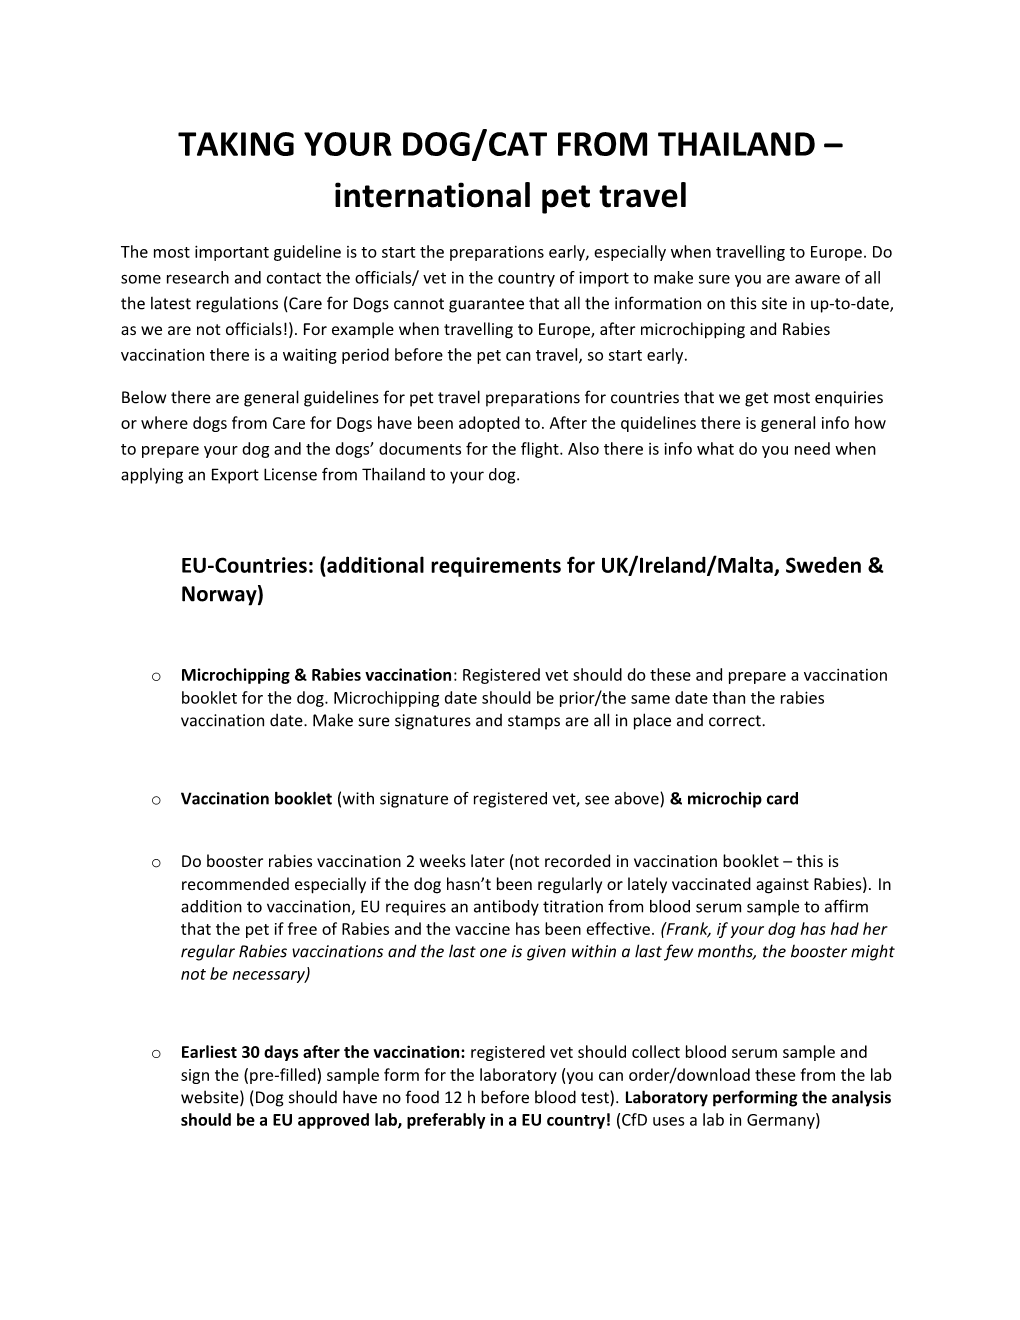 TAKING YOUR DOG/CAT from THAILAND – International Pet Travel